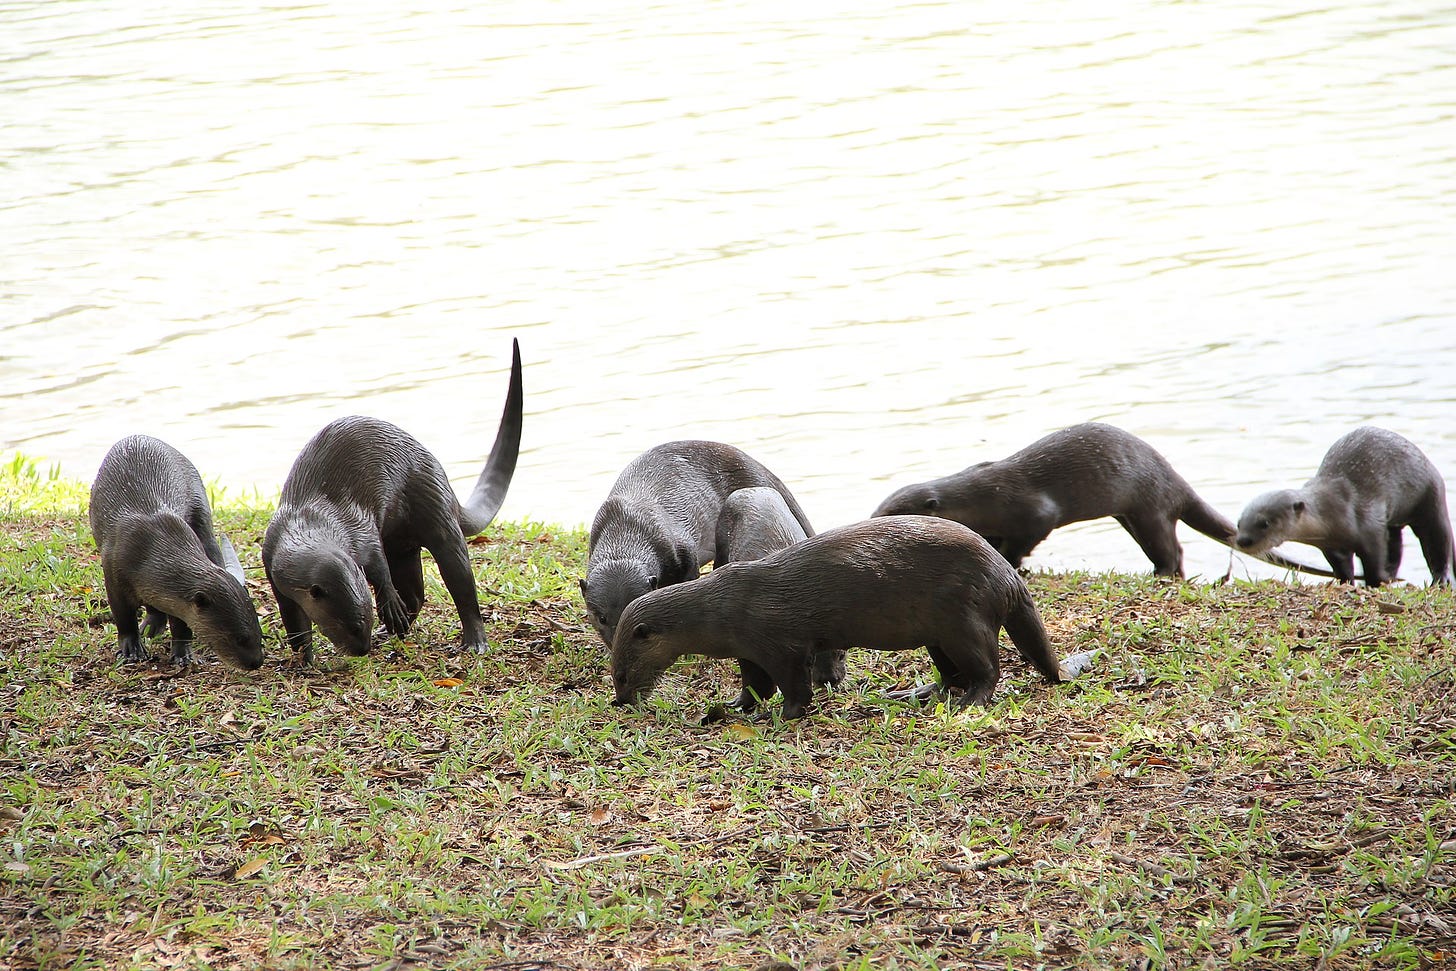 A group of smooth-coated otters exits a river in Singapore